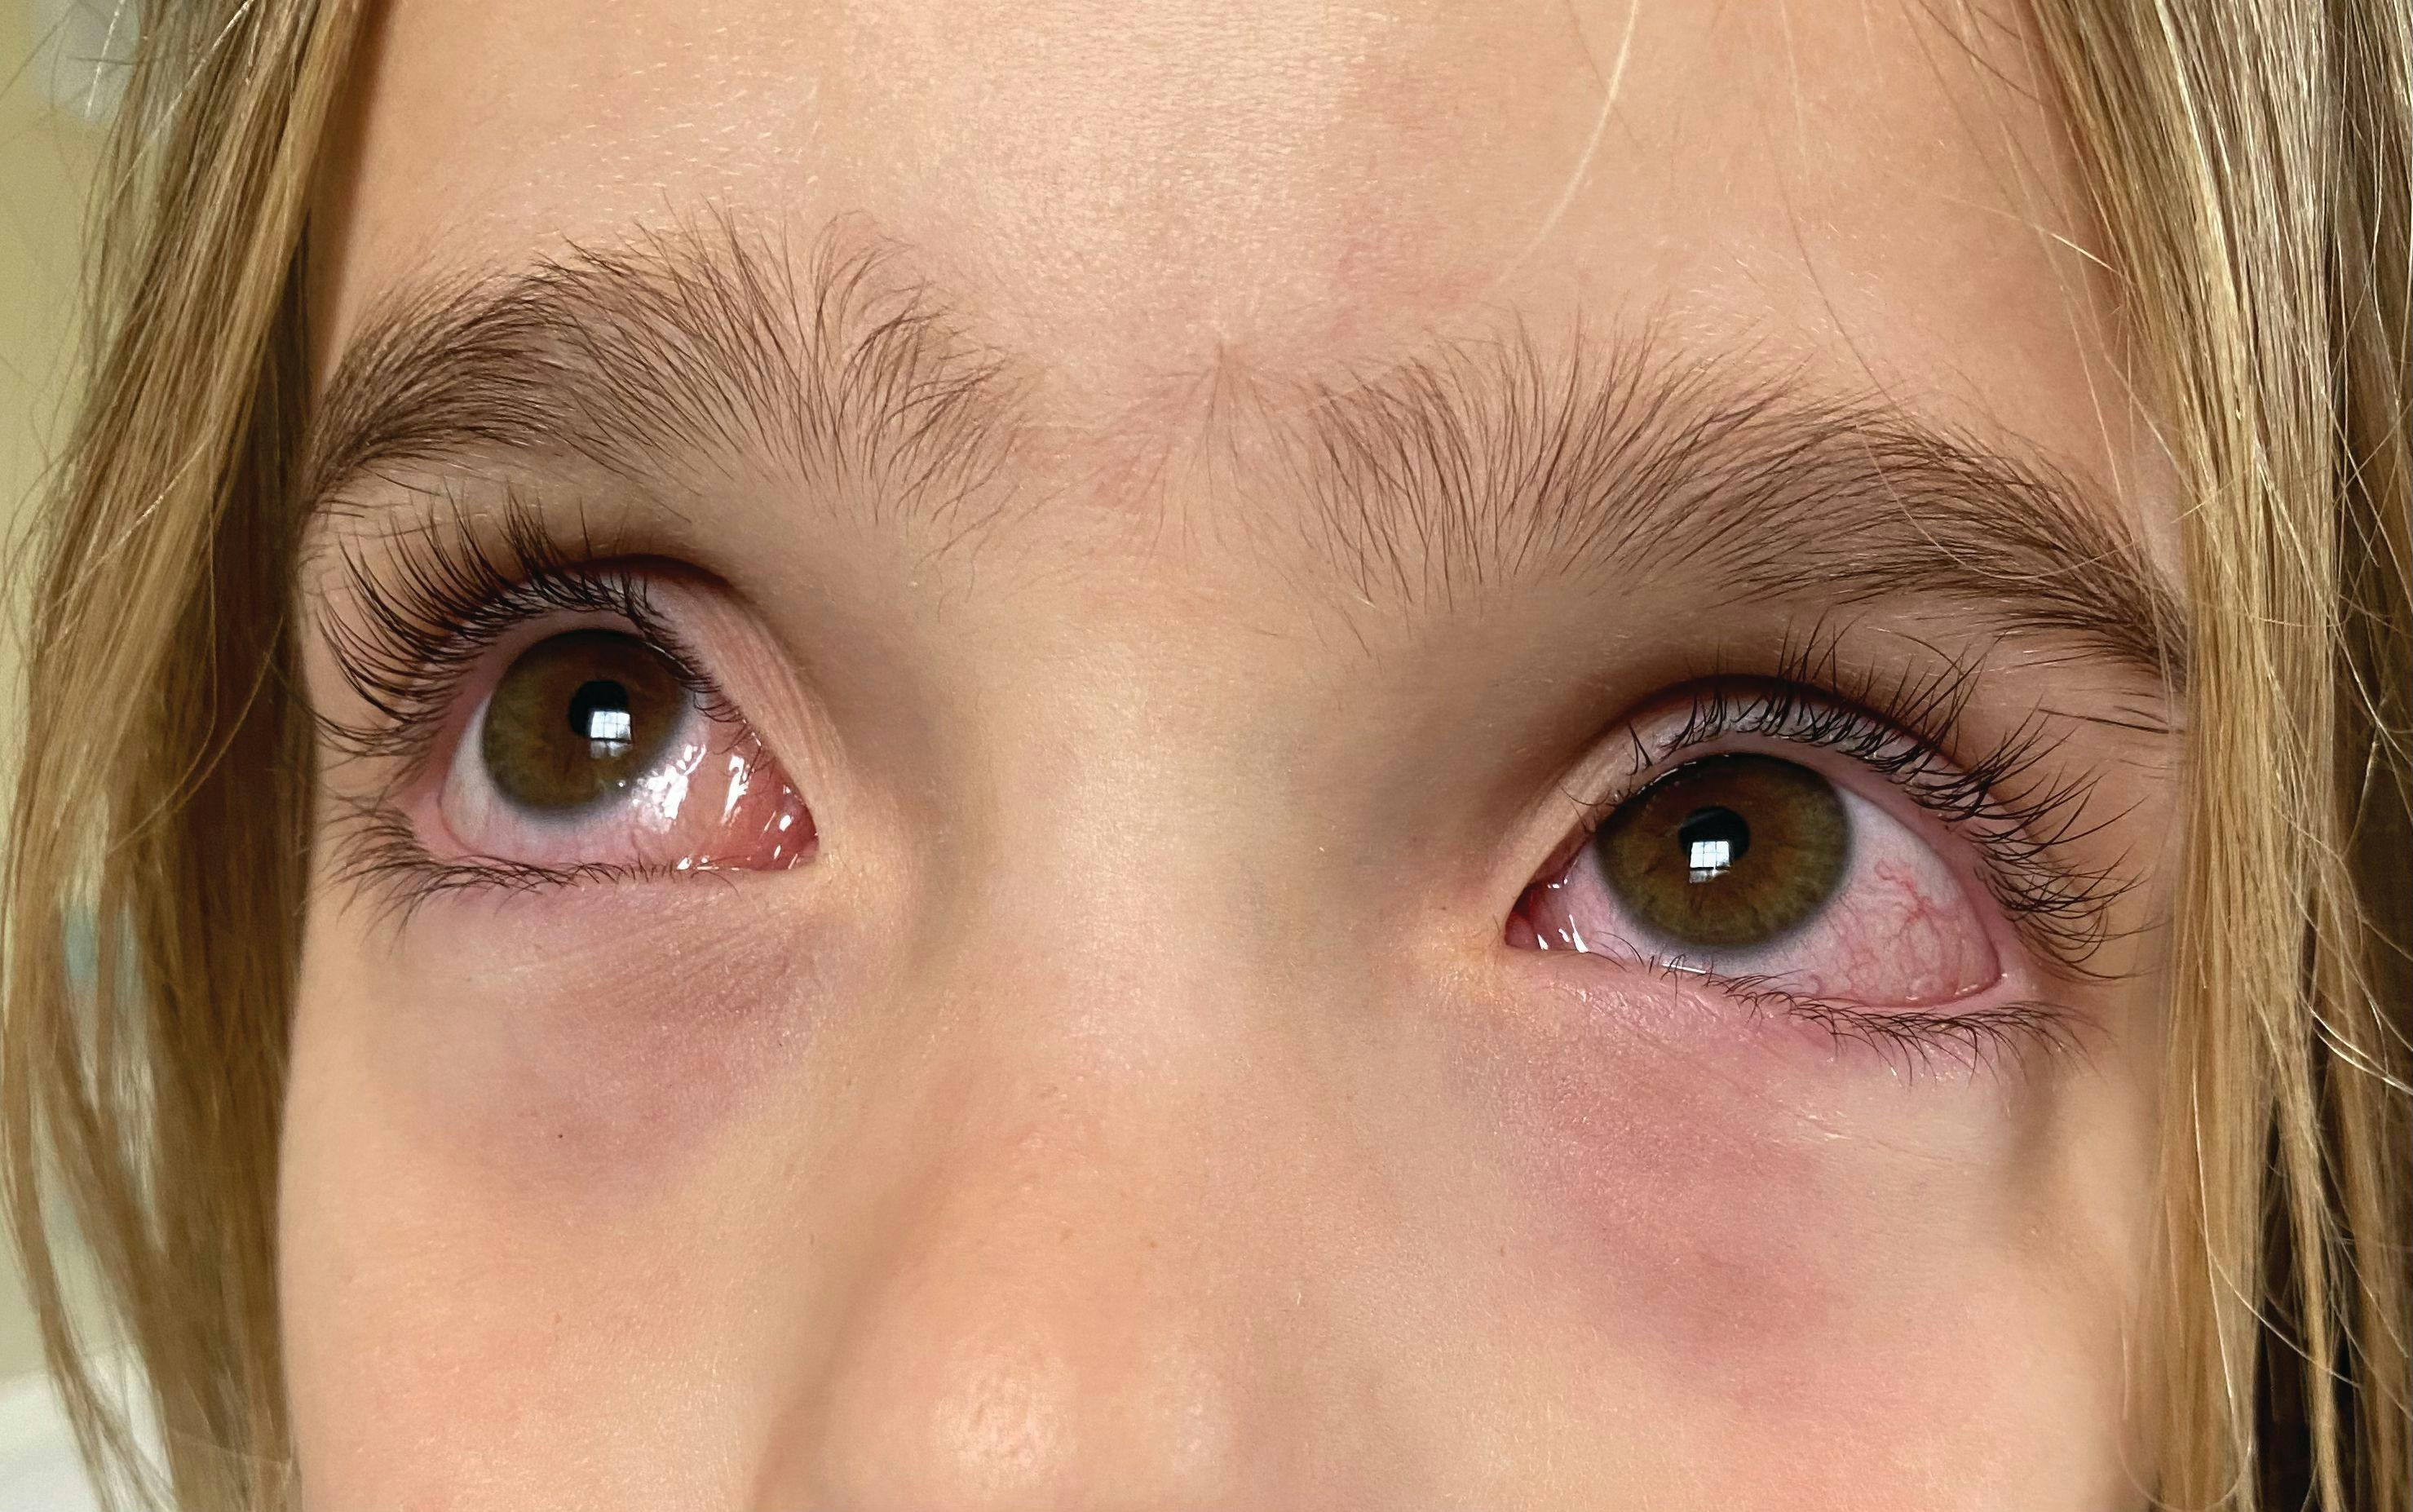 Allergic conjunctivitis is prevalent in youngsters